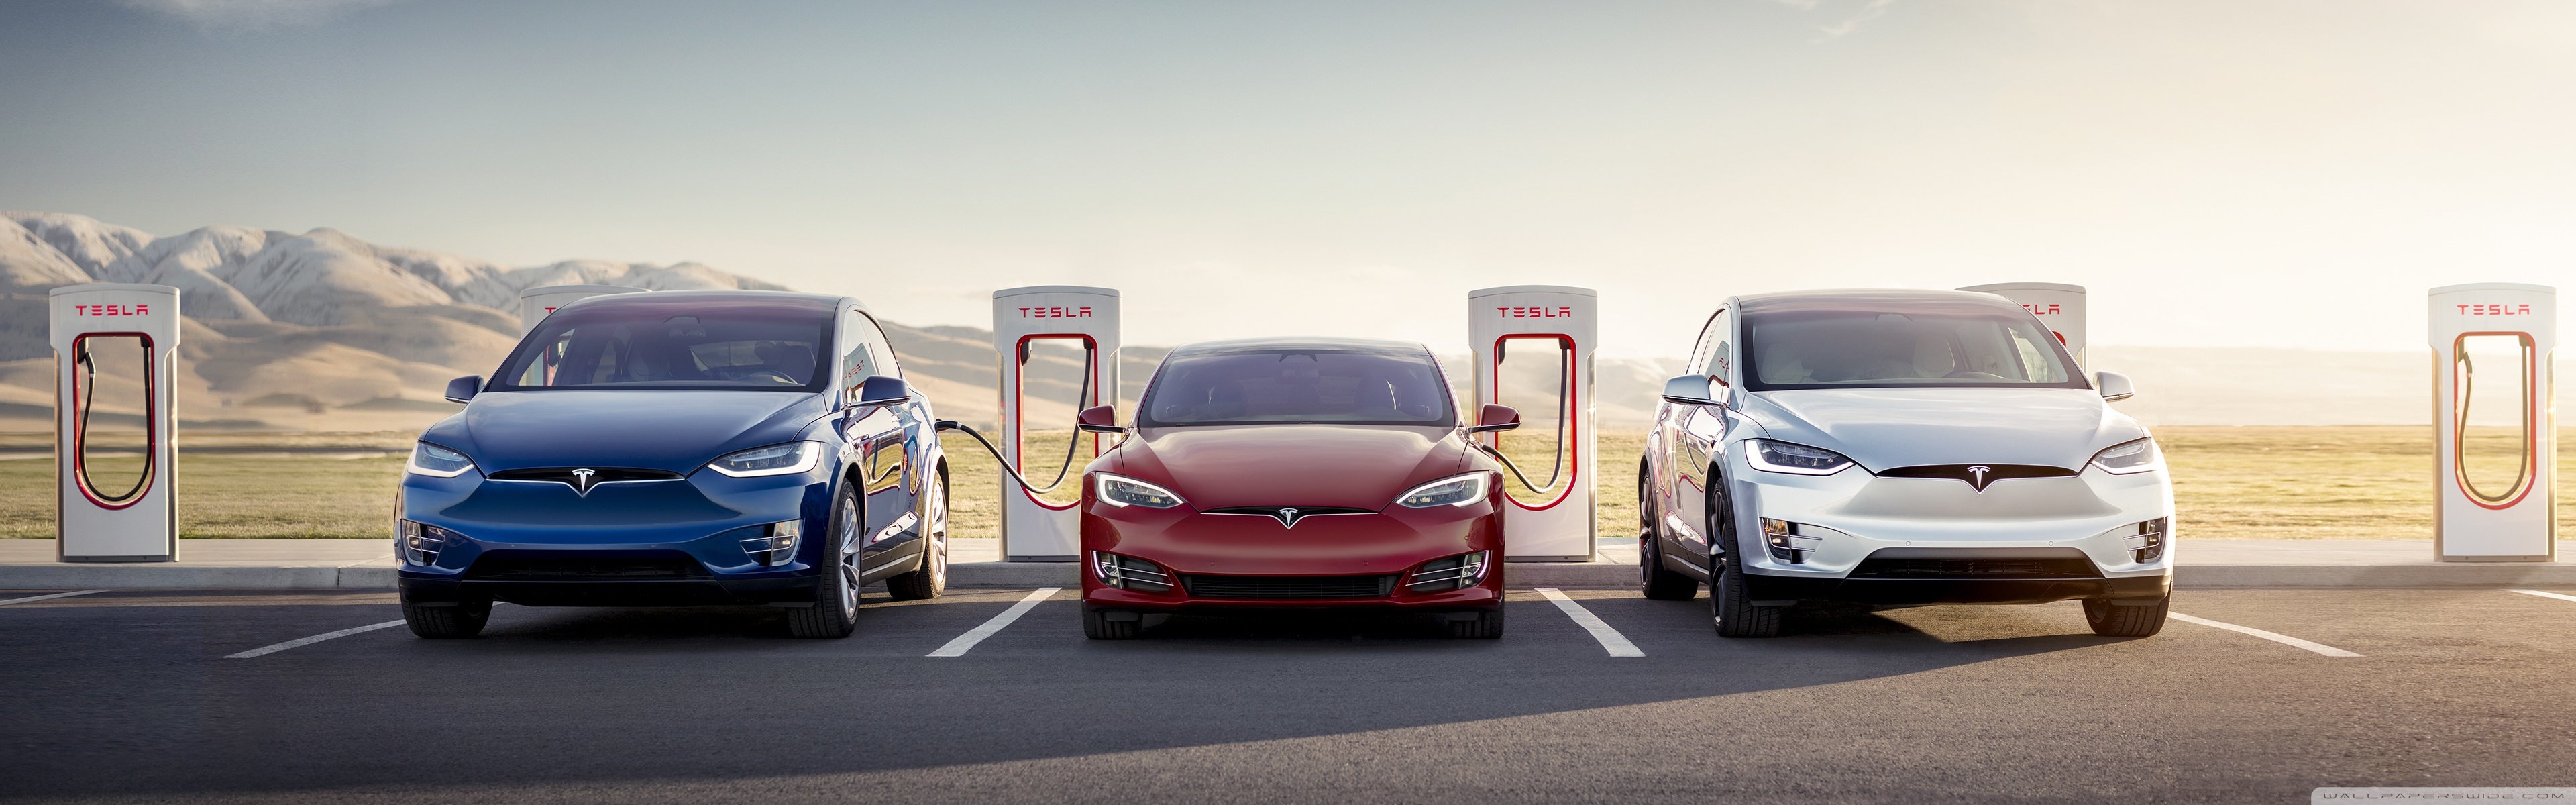 Tesla Model S and X Electric Cars Supercharger Ultra HD Desktop Background Wallpaper for: Widescreen & UltraWide Desktop & Laptop, Multi Display, Dual & Triple Monitor, Tablet